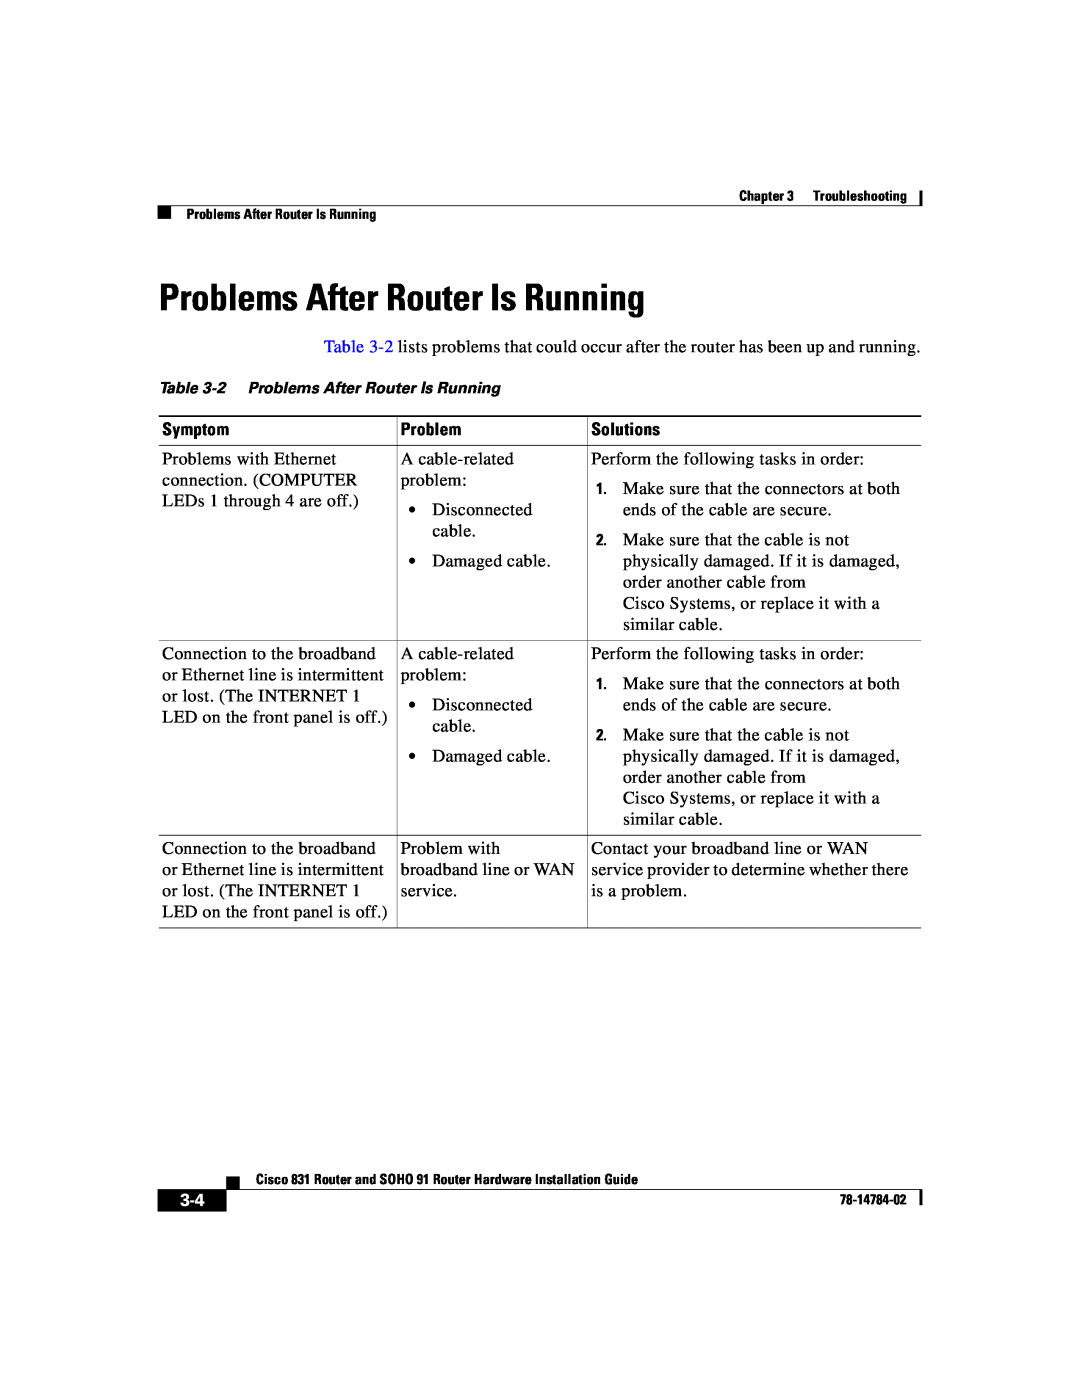 Cisco Systems 78-14784-02 manual 2 Problems After Router Is Running 